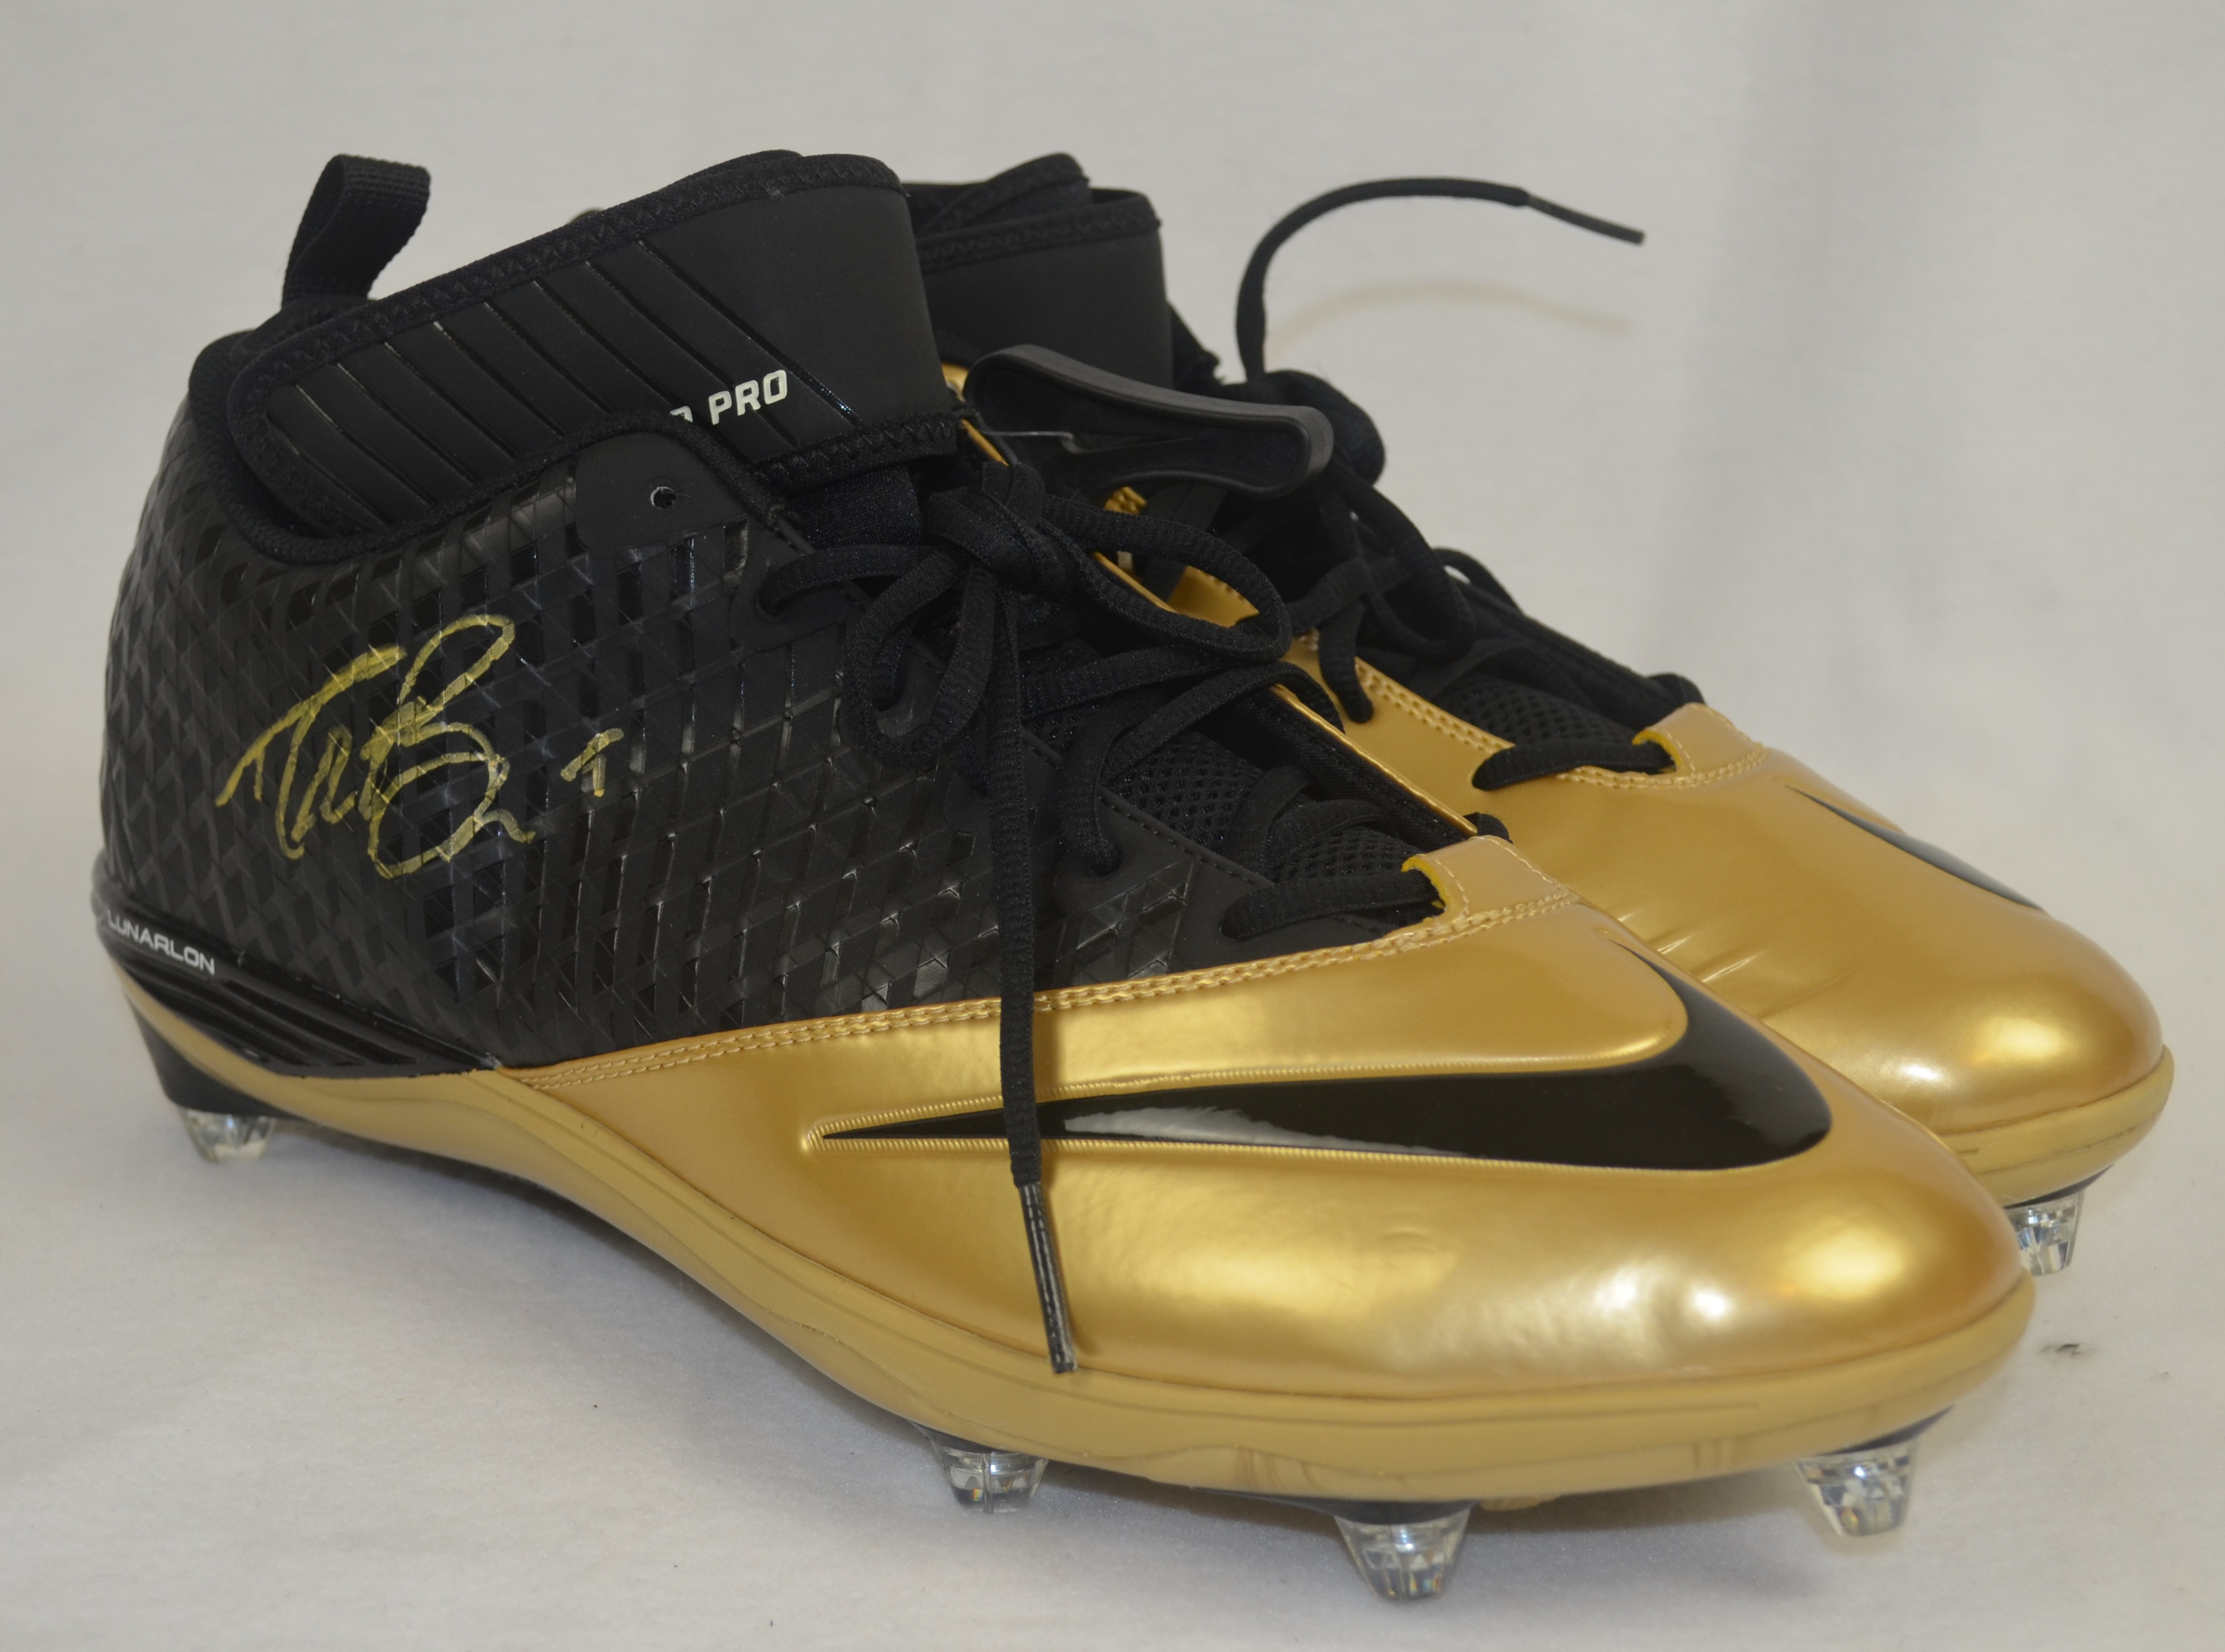 Drew Brees Signed Nike Football Cleat Inscribed Who Dat! (Beckett COA)